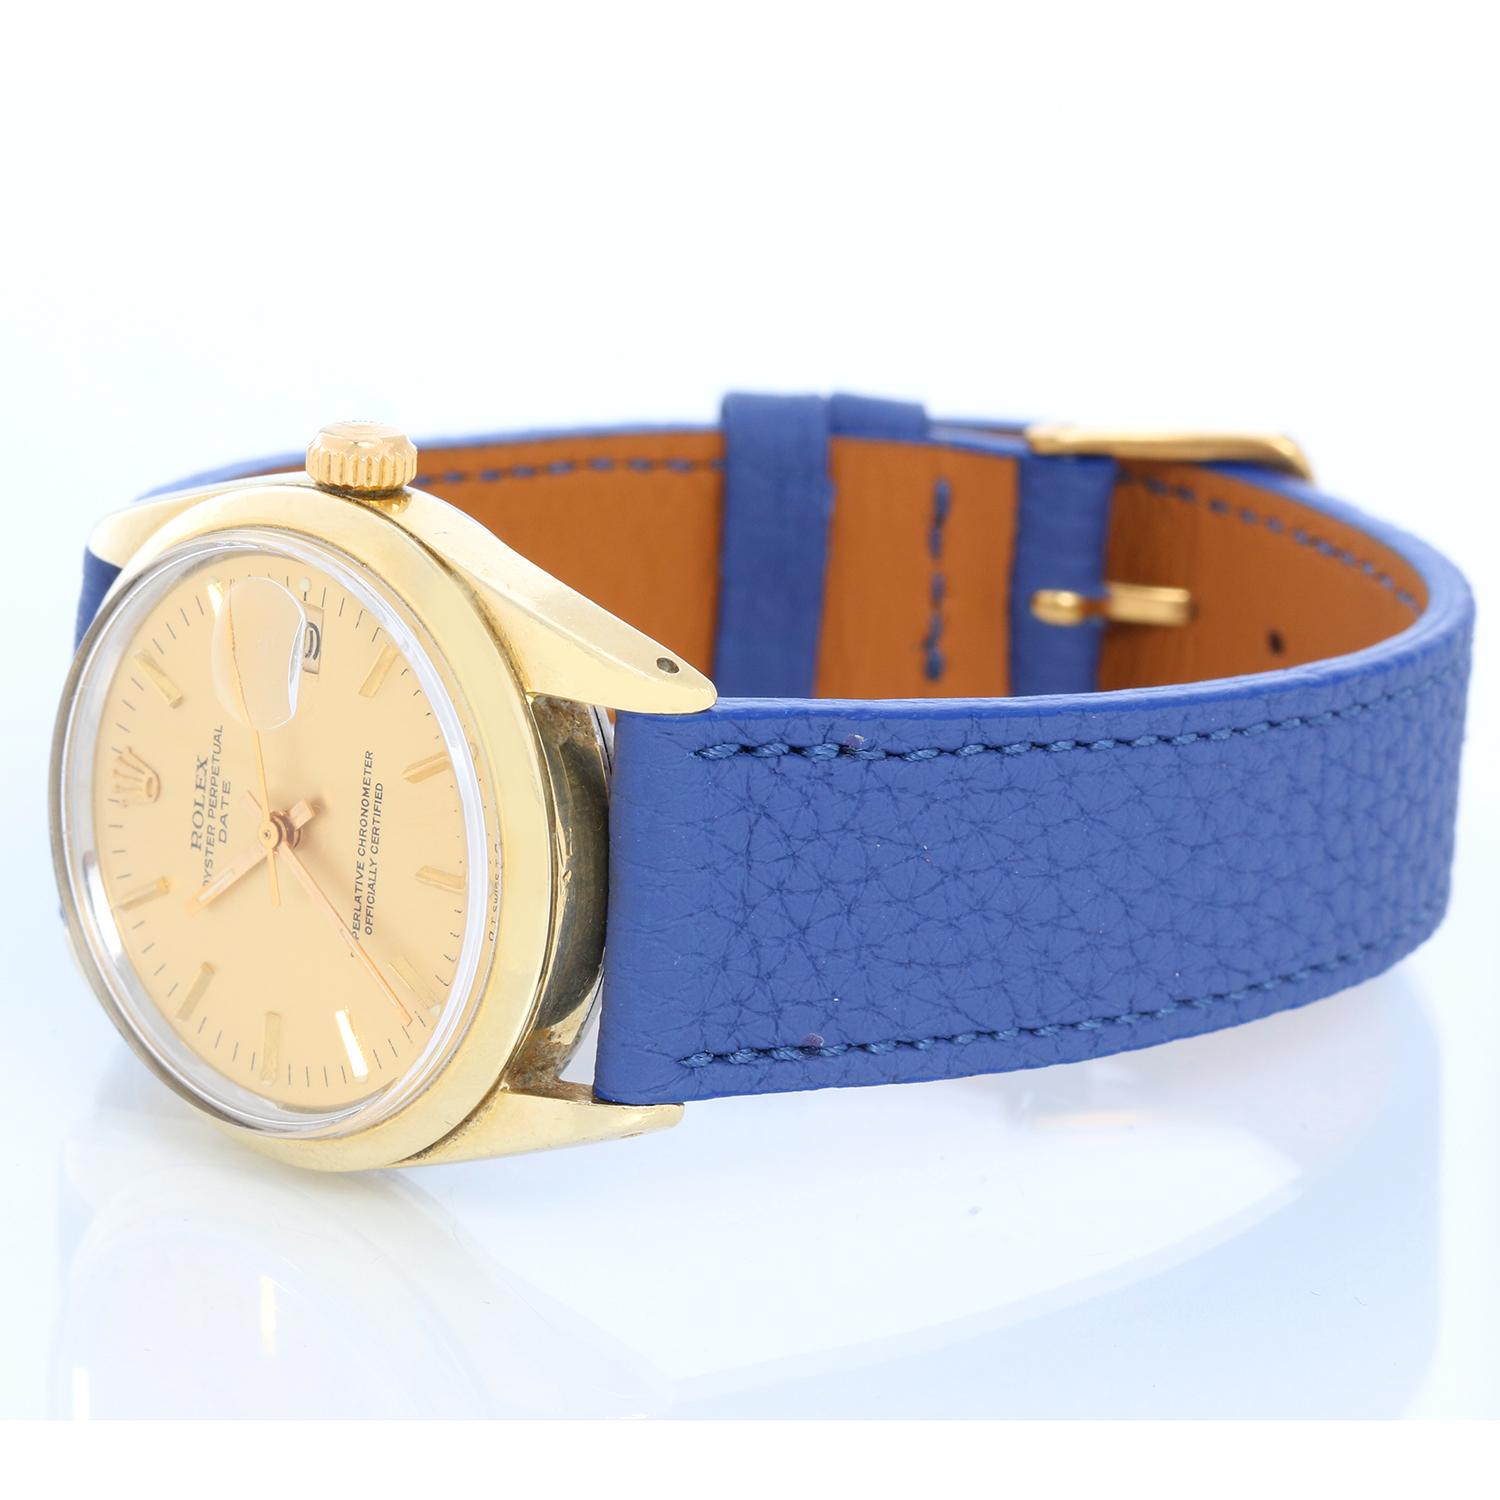 Rolex Date Men's Vintage 14k Gold Shell Watch 1550 - Automatic winding, acrylic crystal. 14k yellow gold shell case with smooth bezel (34mm diameter). Champagne dial with stick hour markers . Blue strap bracelet with tang buckle . Pre-owned with